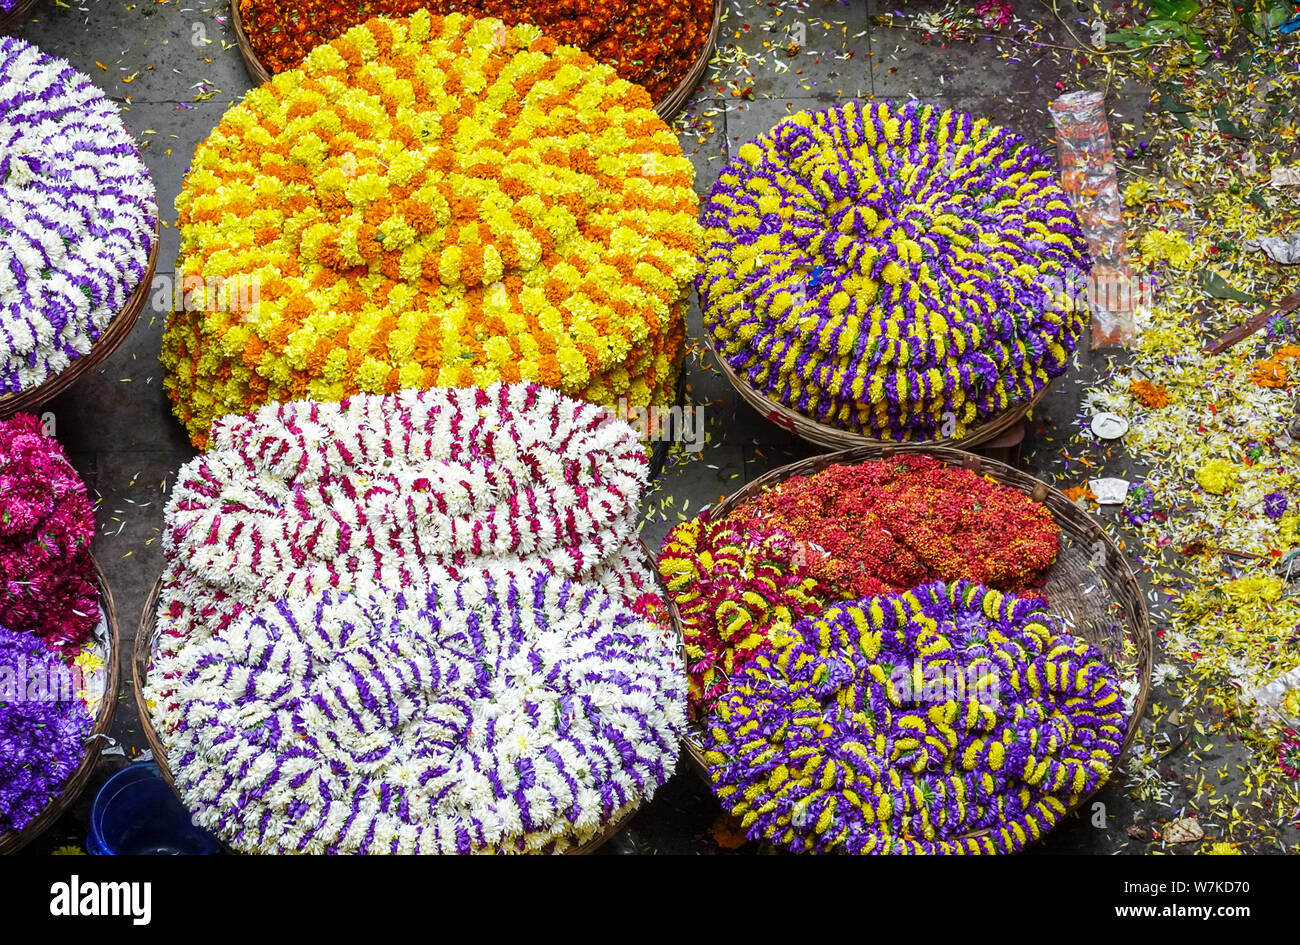 Fresh flowers sold in wholesale inside KR flower market Bangalore India which is one of the biggest flower markets in Asia Stock Photo